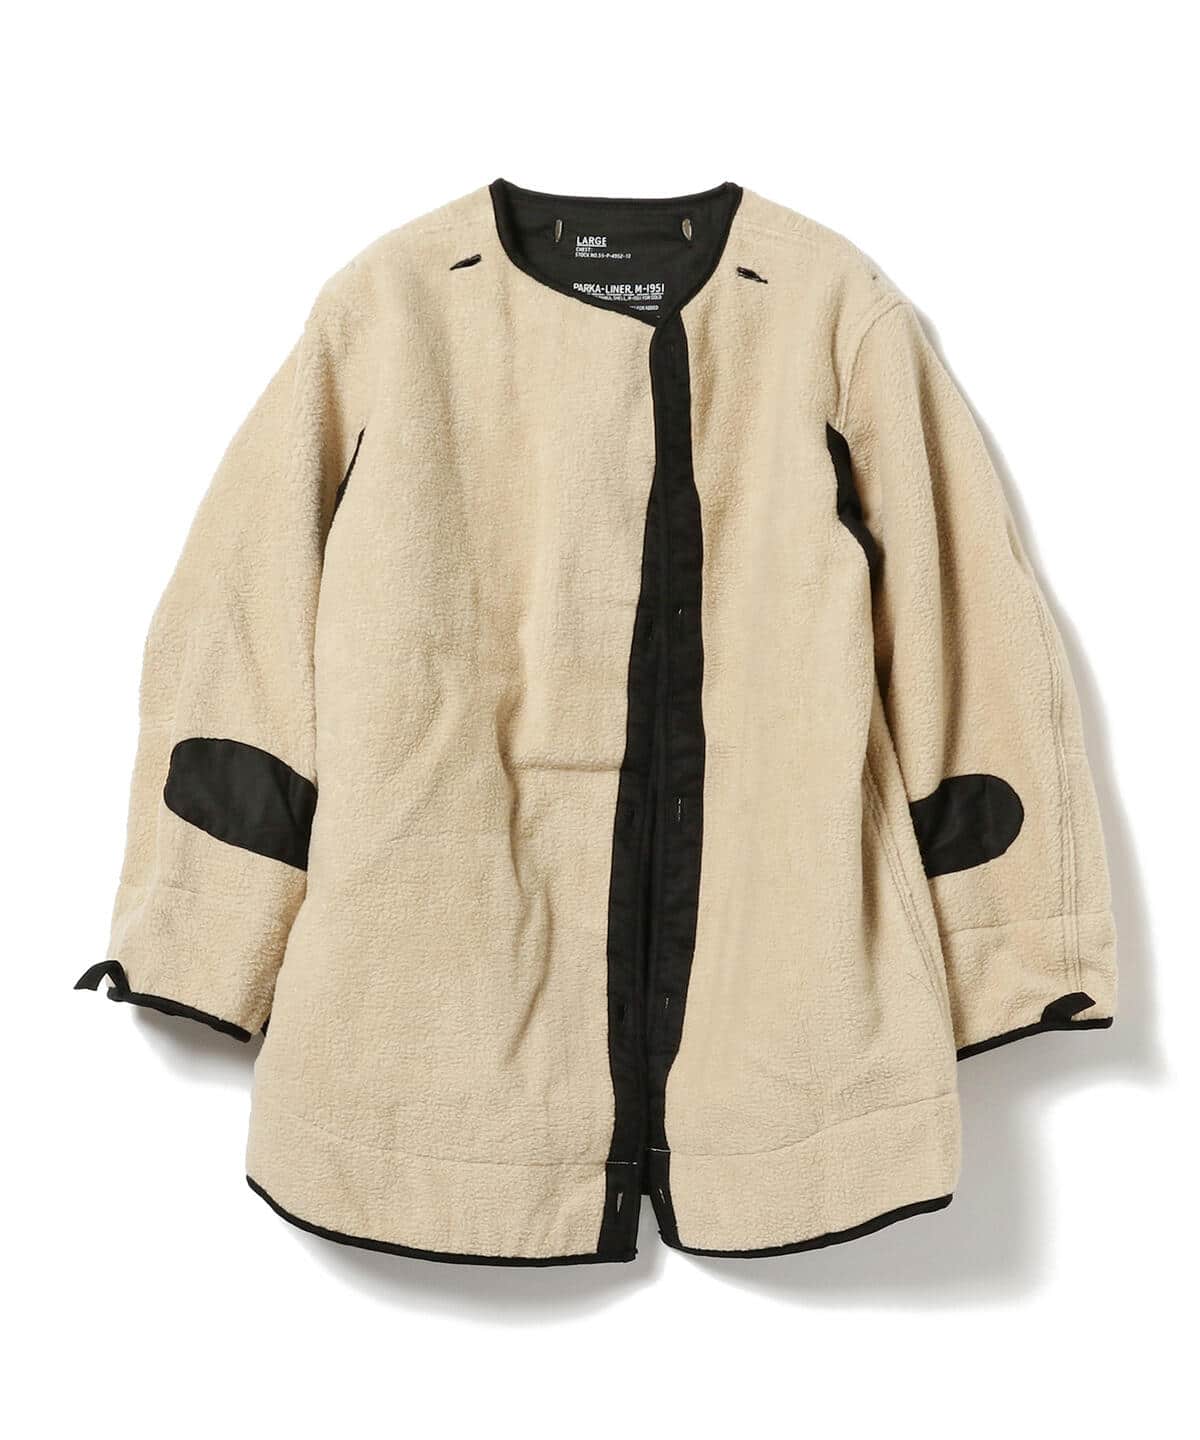 BEAMS（ビームス）BUZZ RICKSON'S / WILLIAM GIBSON COLLECTION / M-51 Parka With  Liner（コート モッズコート）通販｜BEAMS